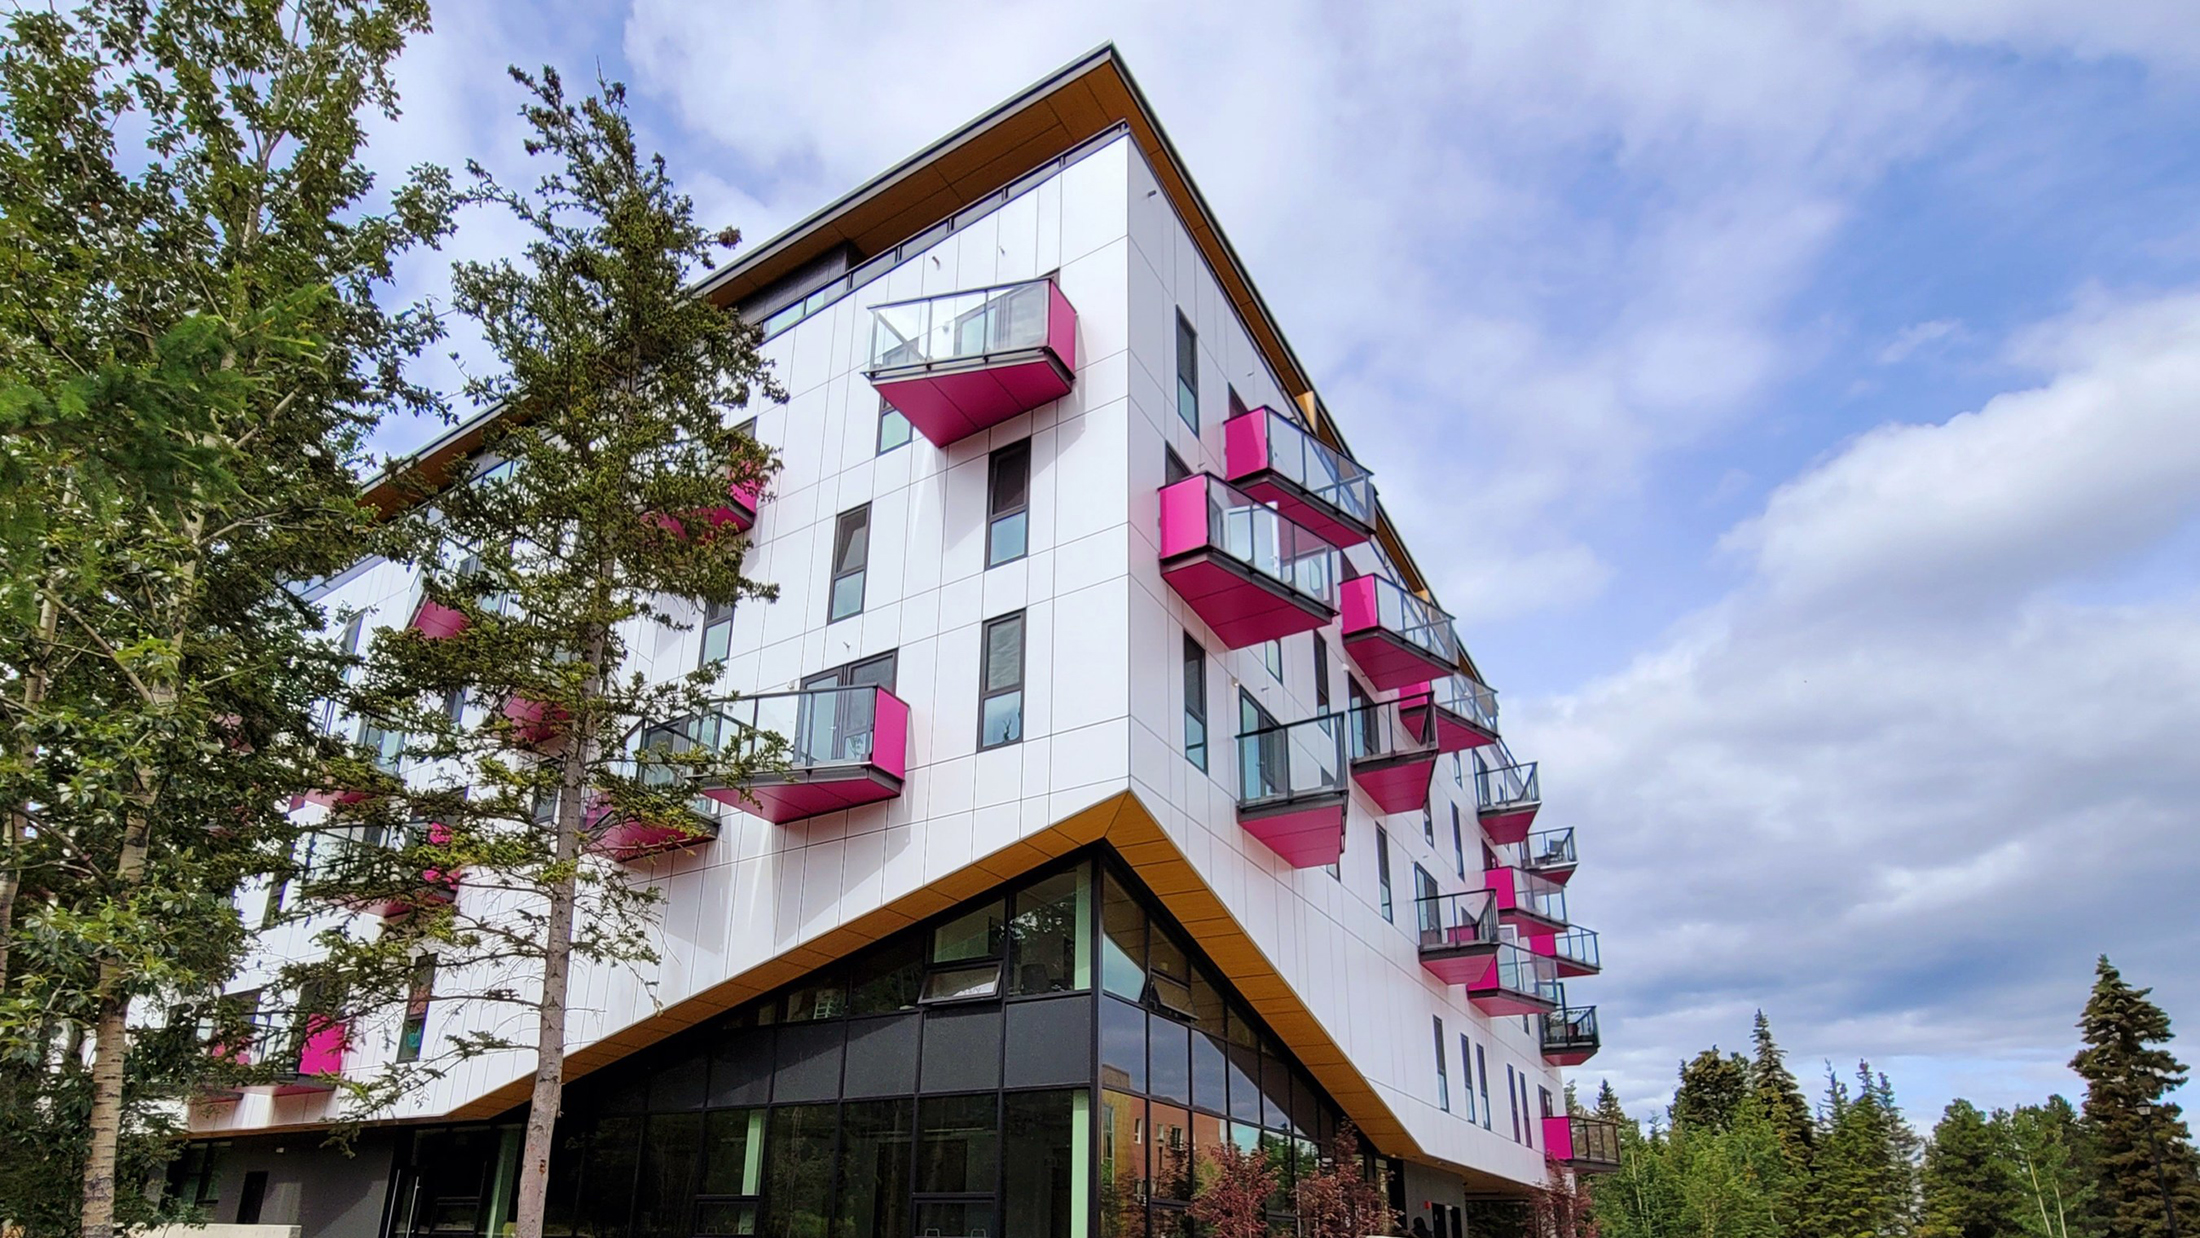 A Whitehorse building that empowers its diverse tenants